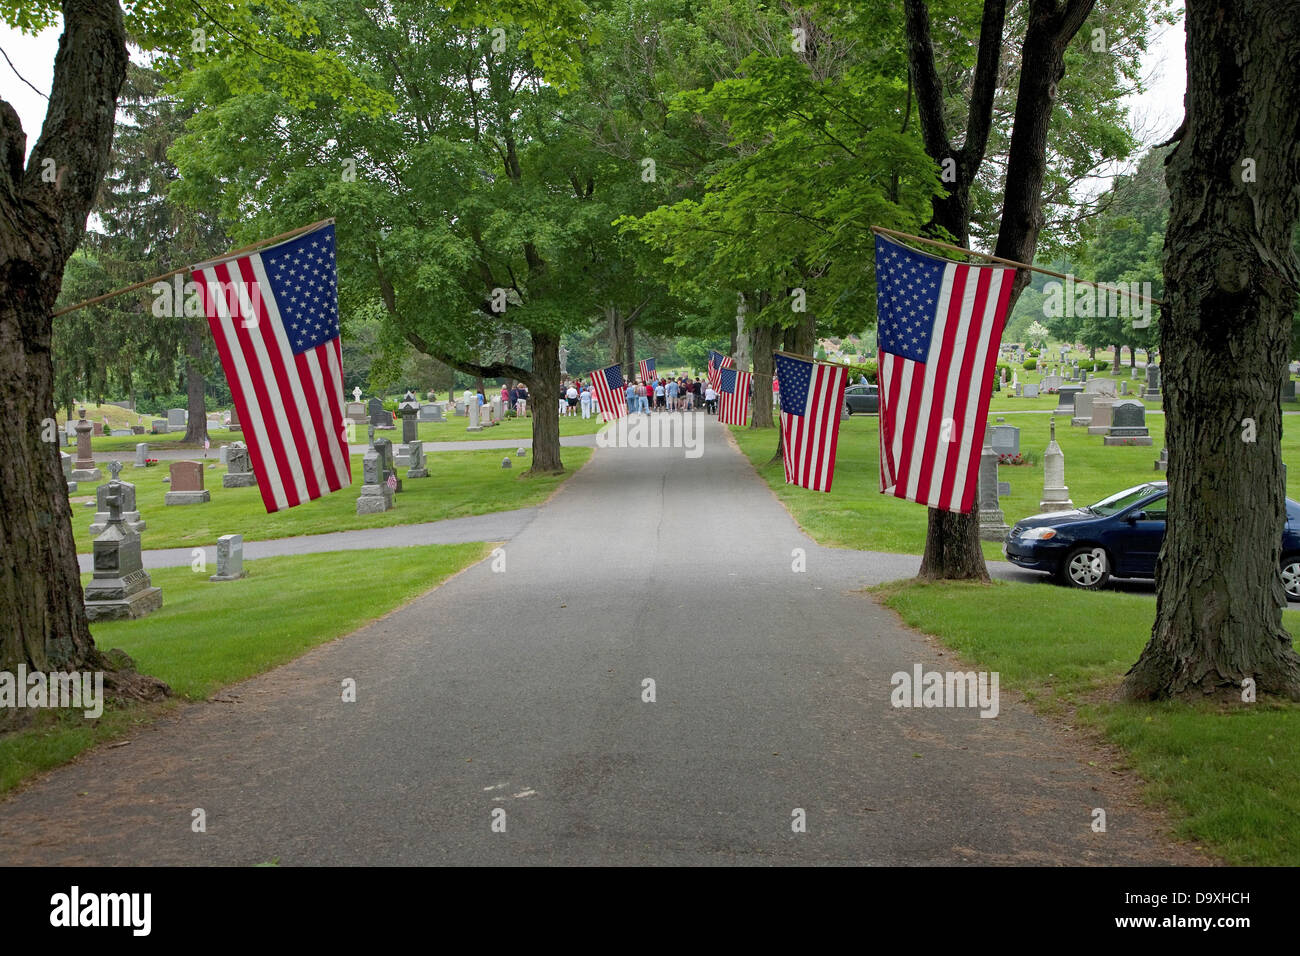 Flags line cemetery on Memorial day where crowd gathers honor fallen soldiers outside Lexington MA on Memorial Day 2011 Stock Photo